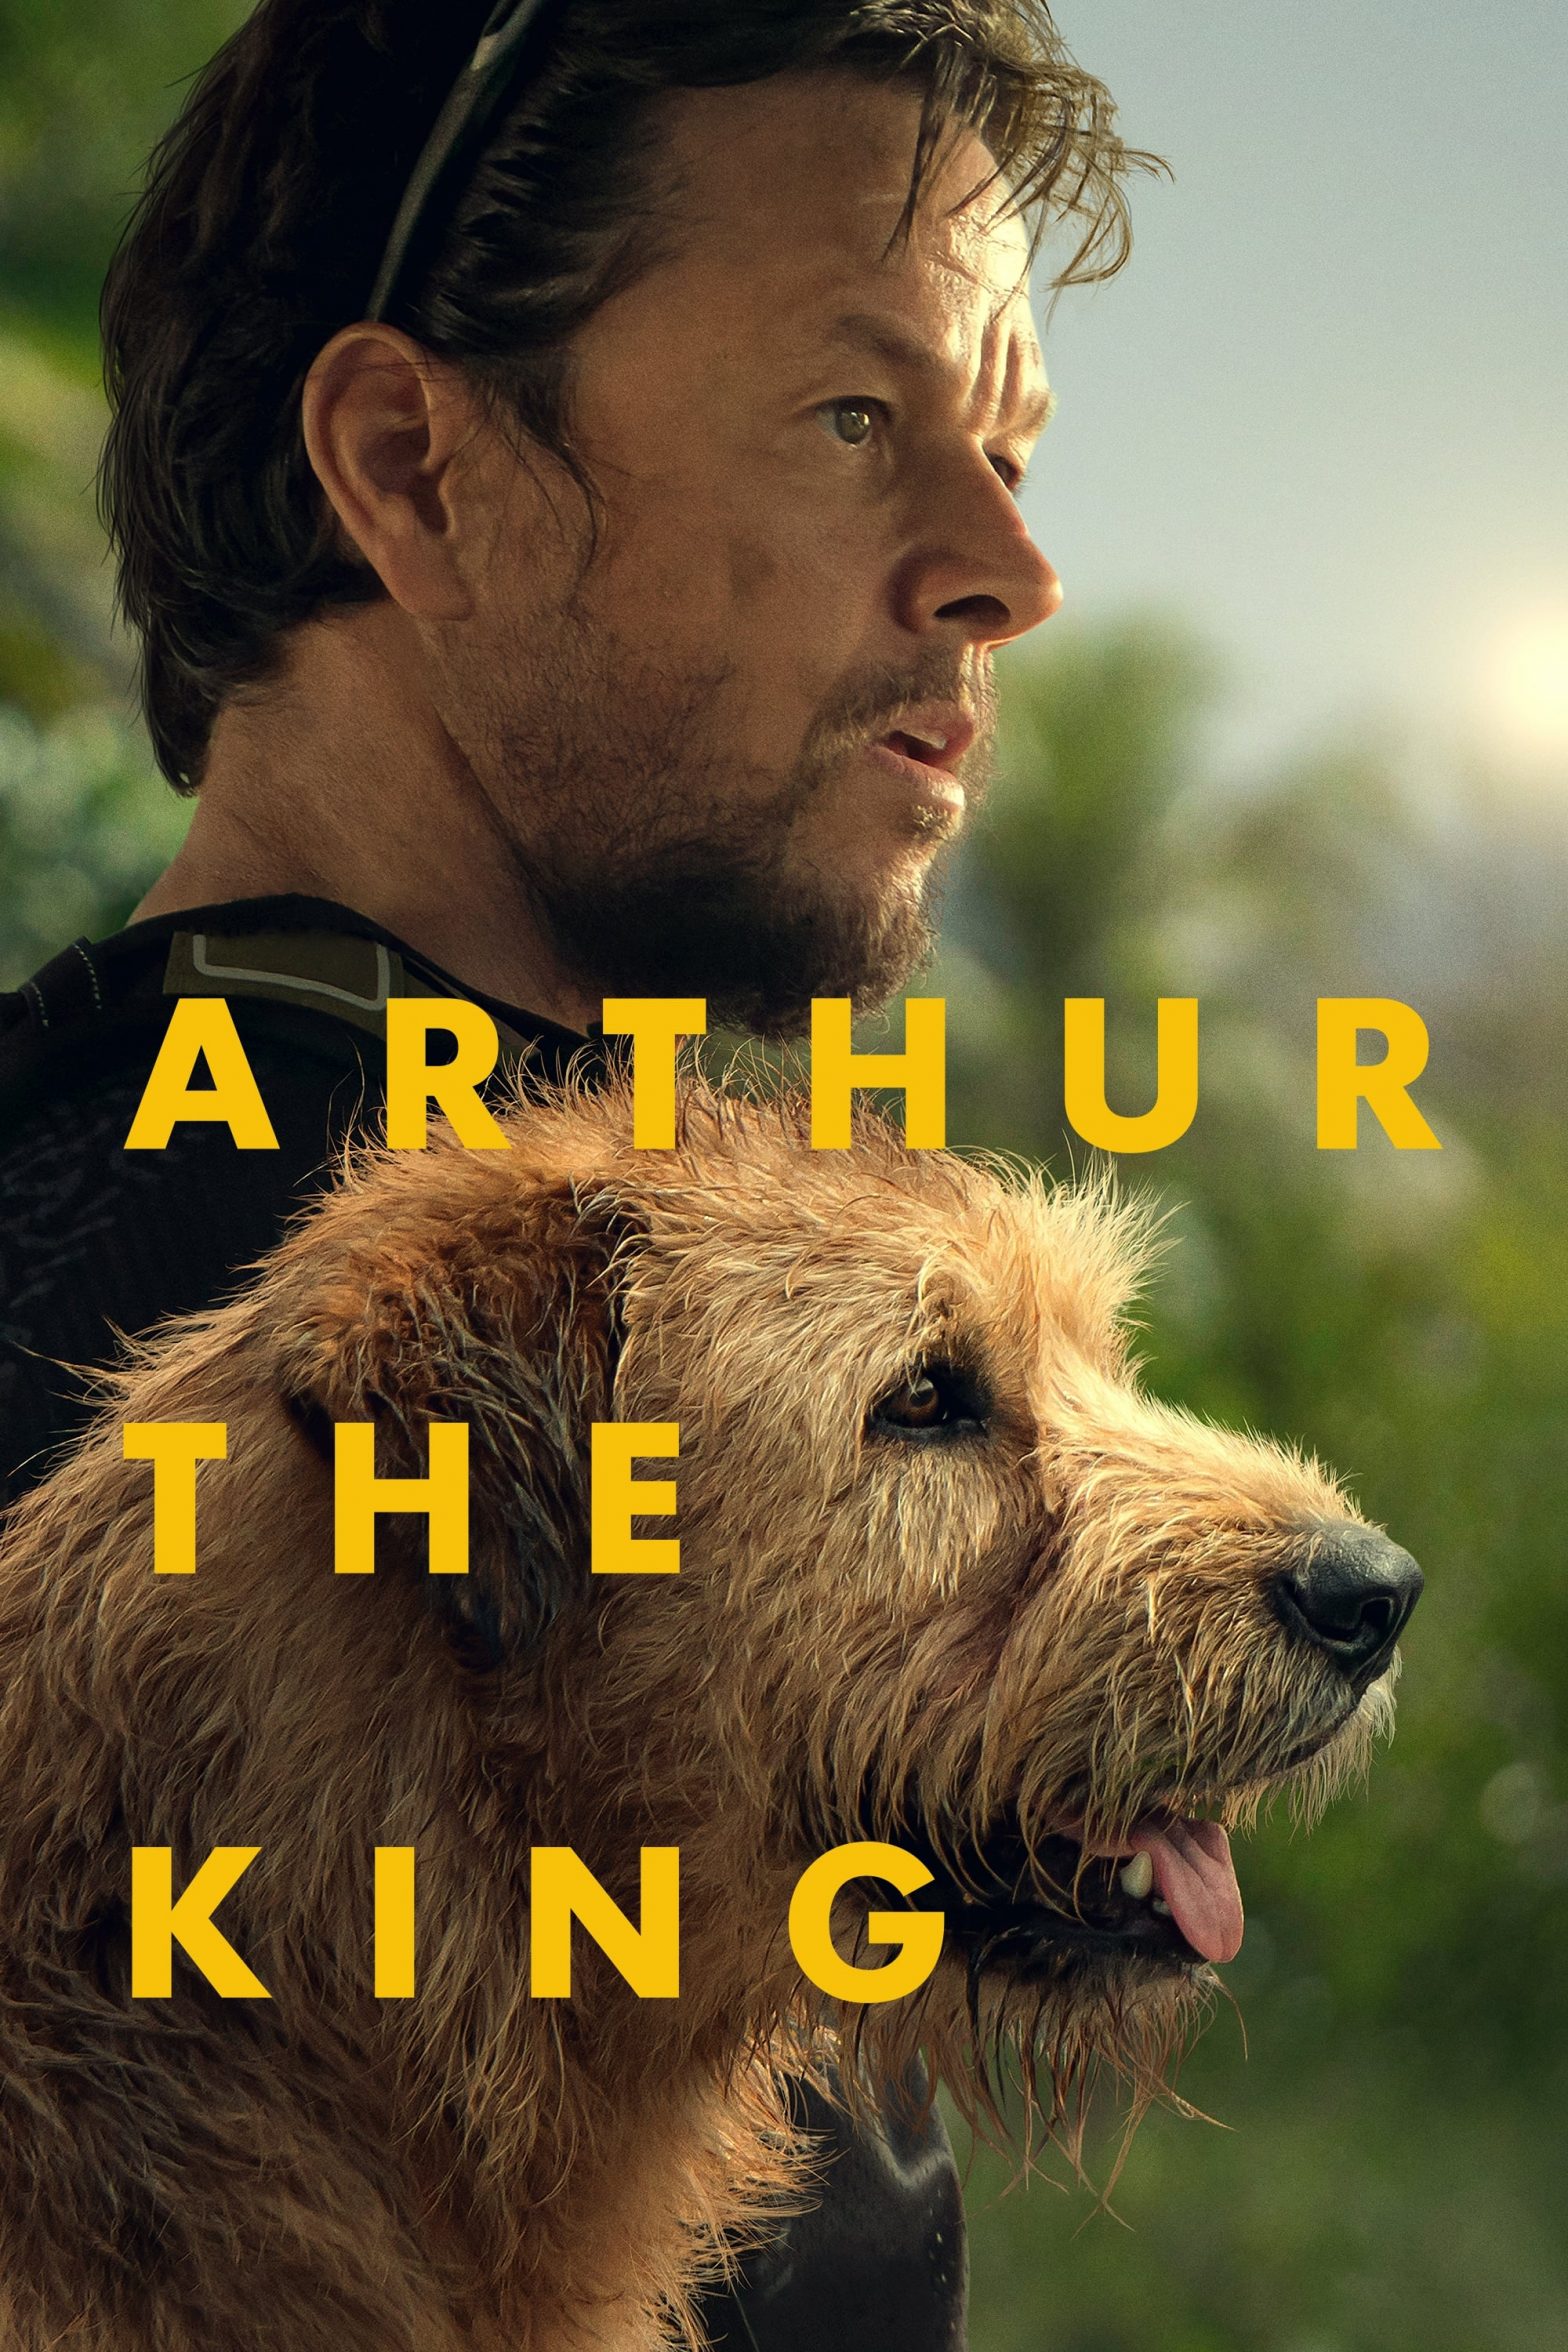 Poster for the movie "Arthur the King"